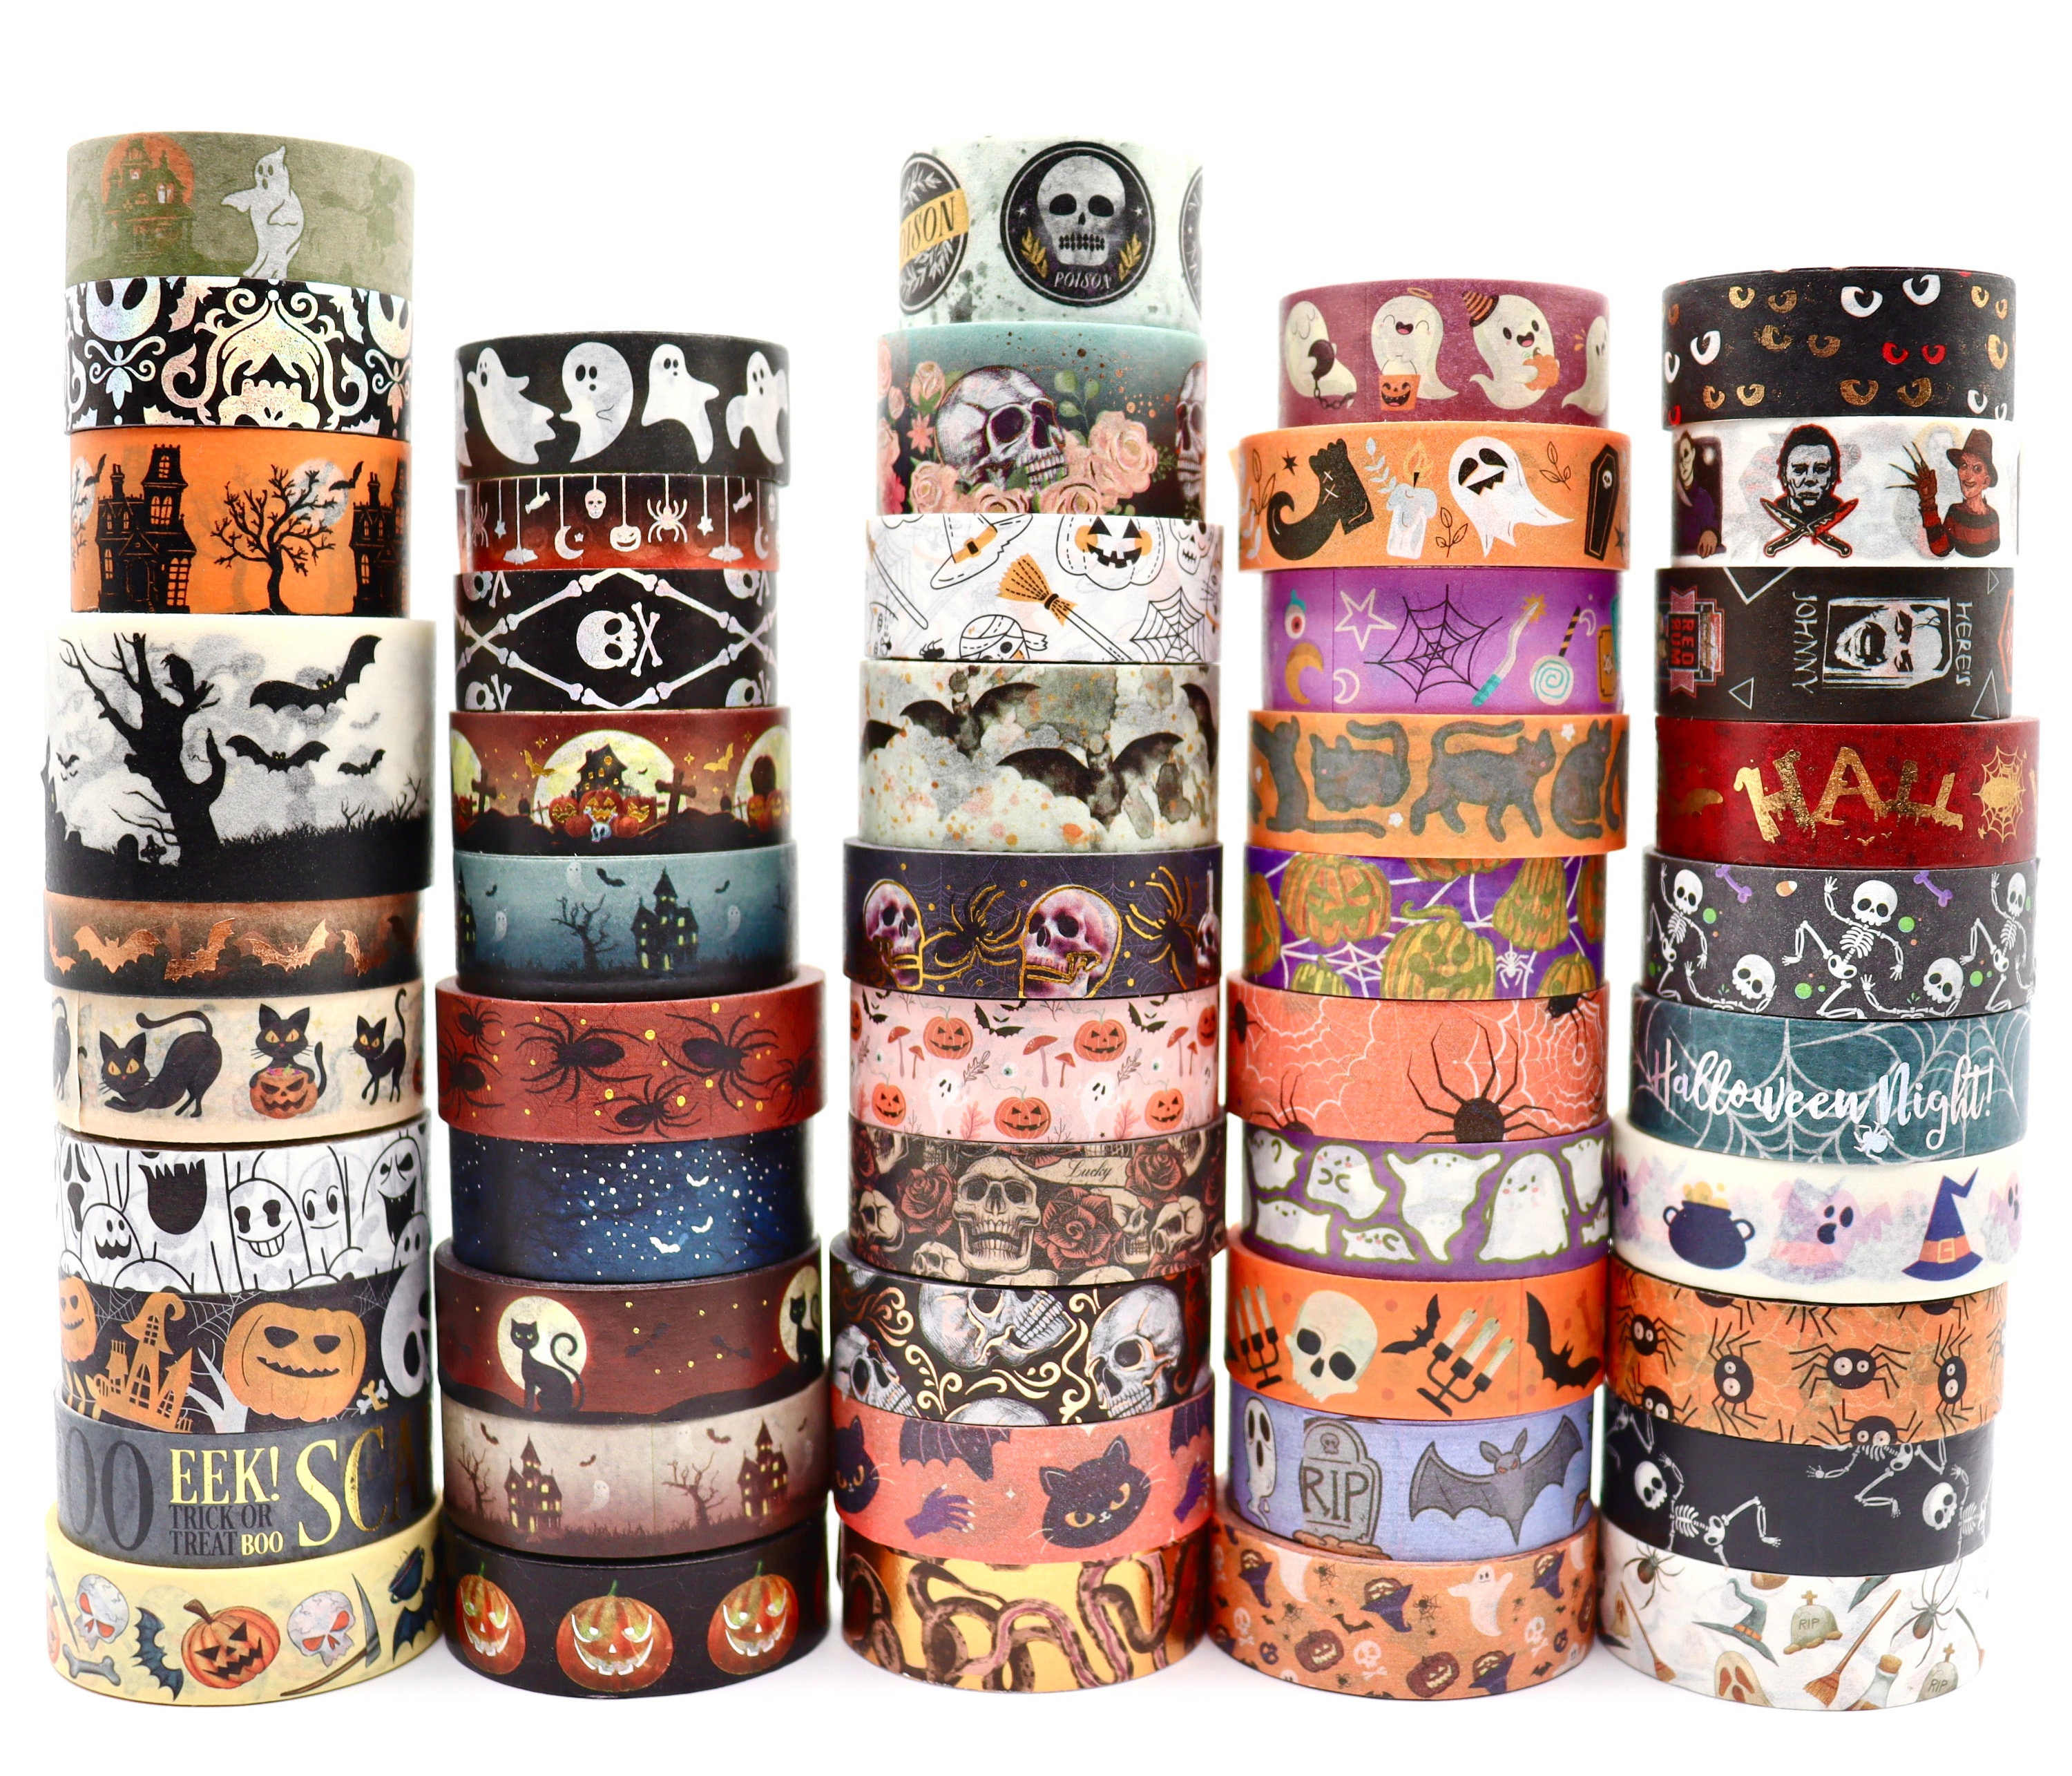 Animal Designs Washi Tape Samples Decorative Tape for Crafts Cute Planner  Decorations Embellishments for Journaling 1 Meter 